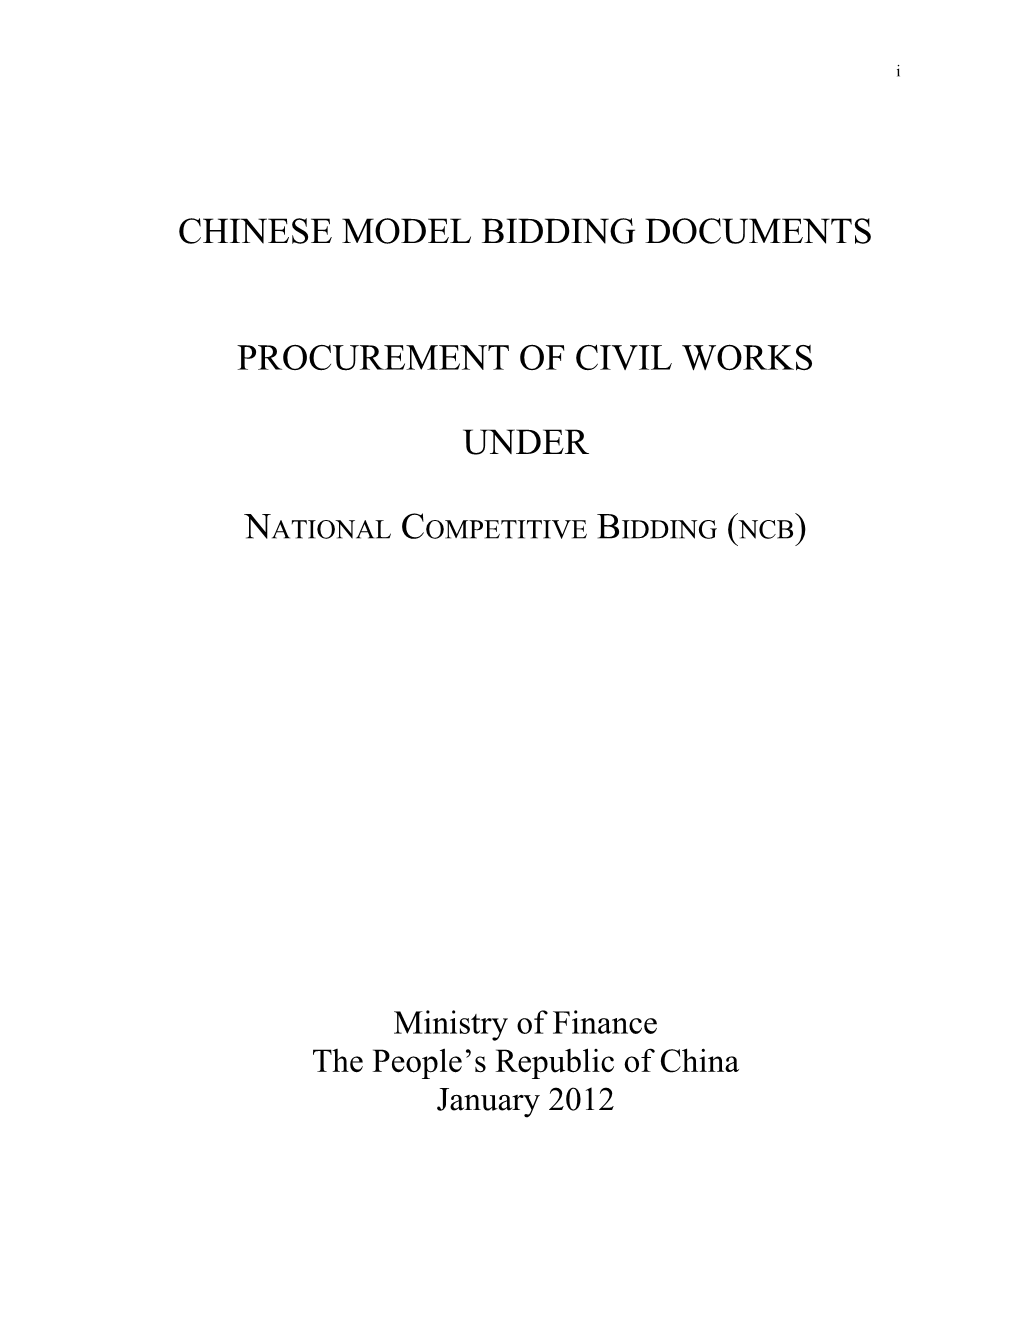 Chinese Model Bidding Documents